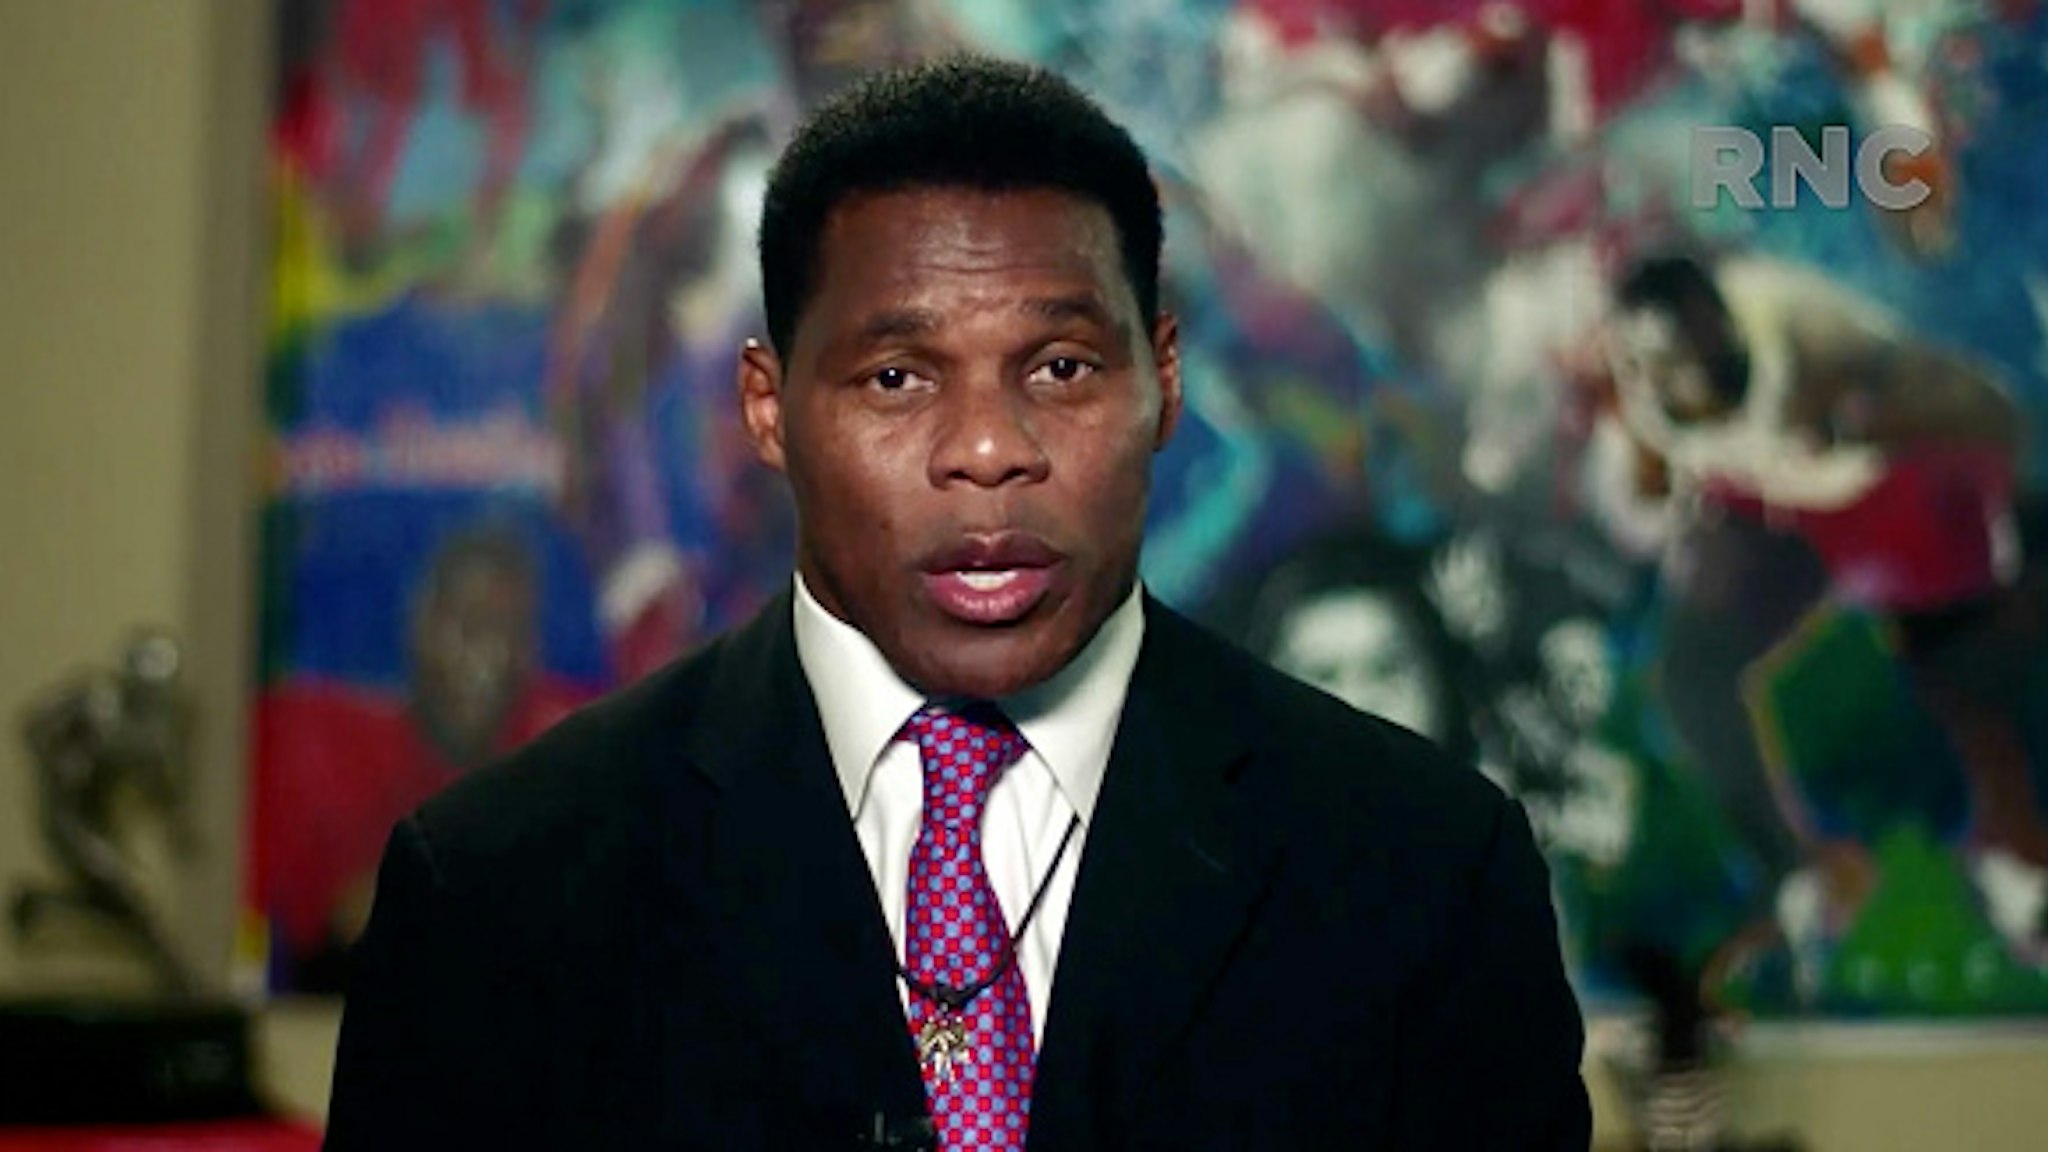 CHARLOTTE, NC - AUGUST 24: (EDITORIAL USE ONLY) In this screenshot from the RNC’s livestream of the 2020 Republican National Convention, former NFL athlete Herschel Walker addresses the virtual convention on August 24, 2020. The convention is being held virtually due to the coronavirus pandemic but will include speeches from various locations including Charlotte, North Carolina and Washington, DC.